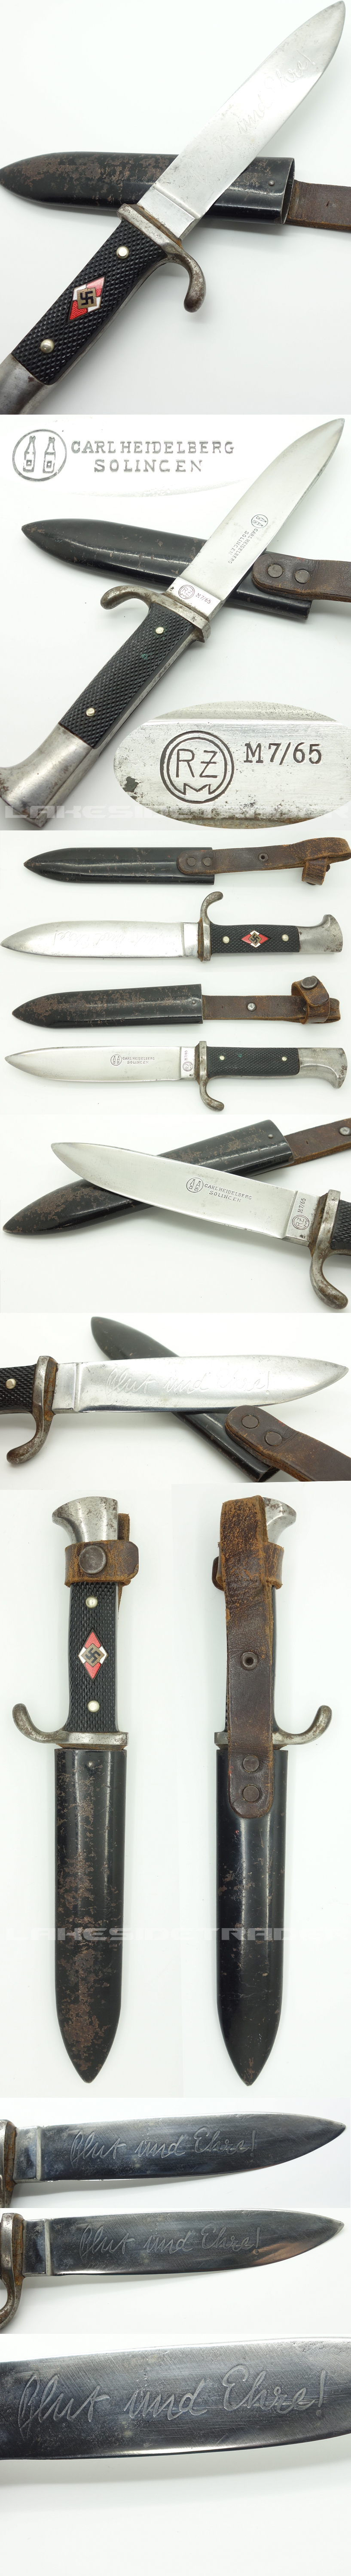 Transitional Hitler Youth Knife by Carl Heidelberg